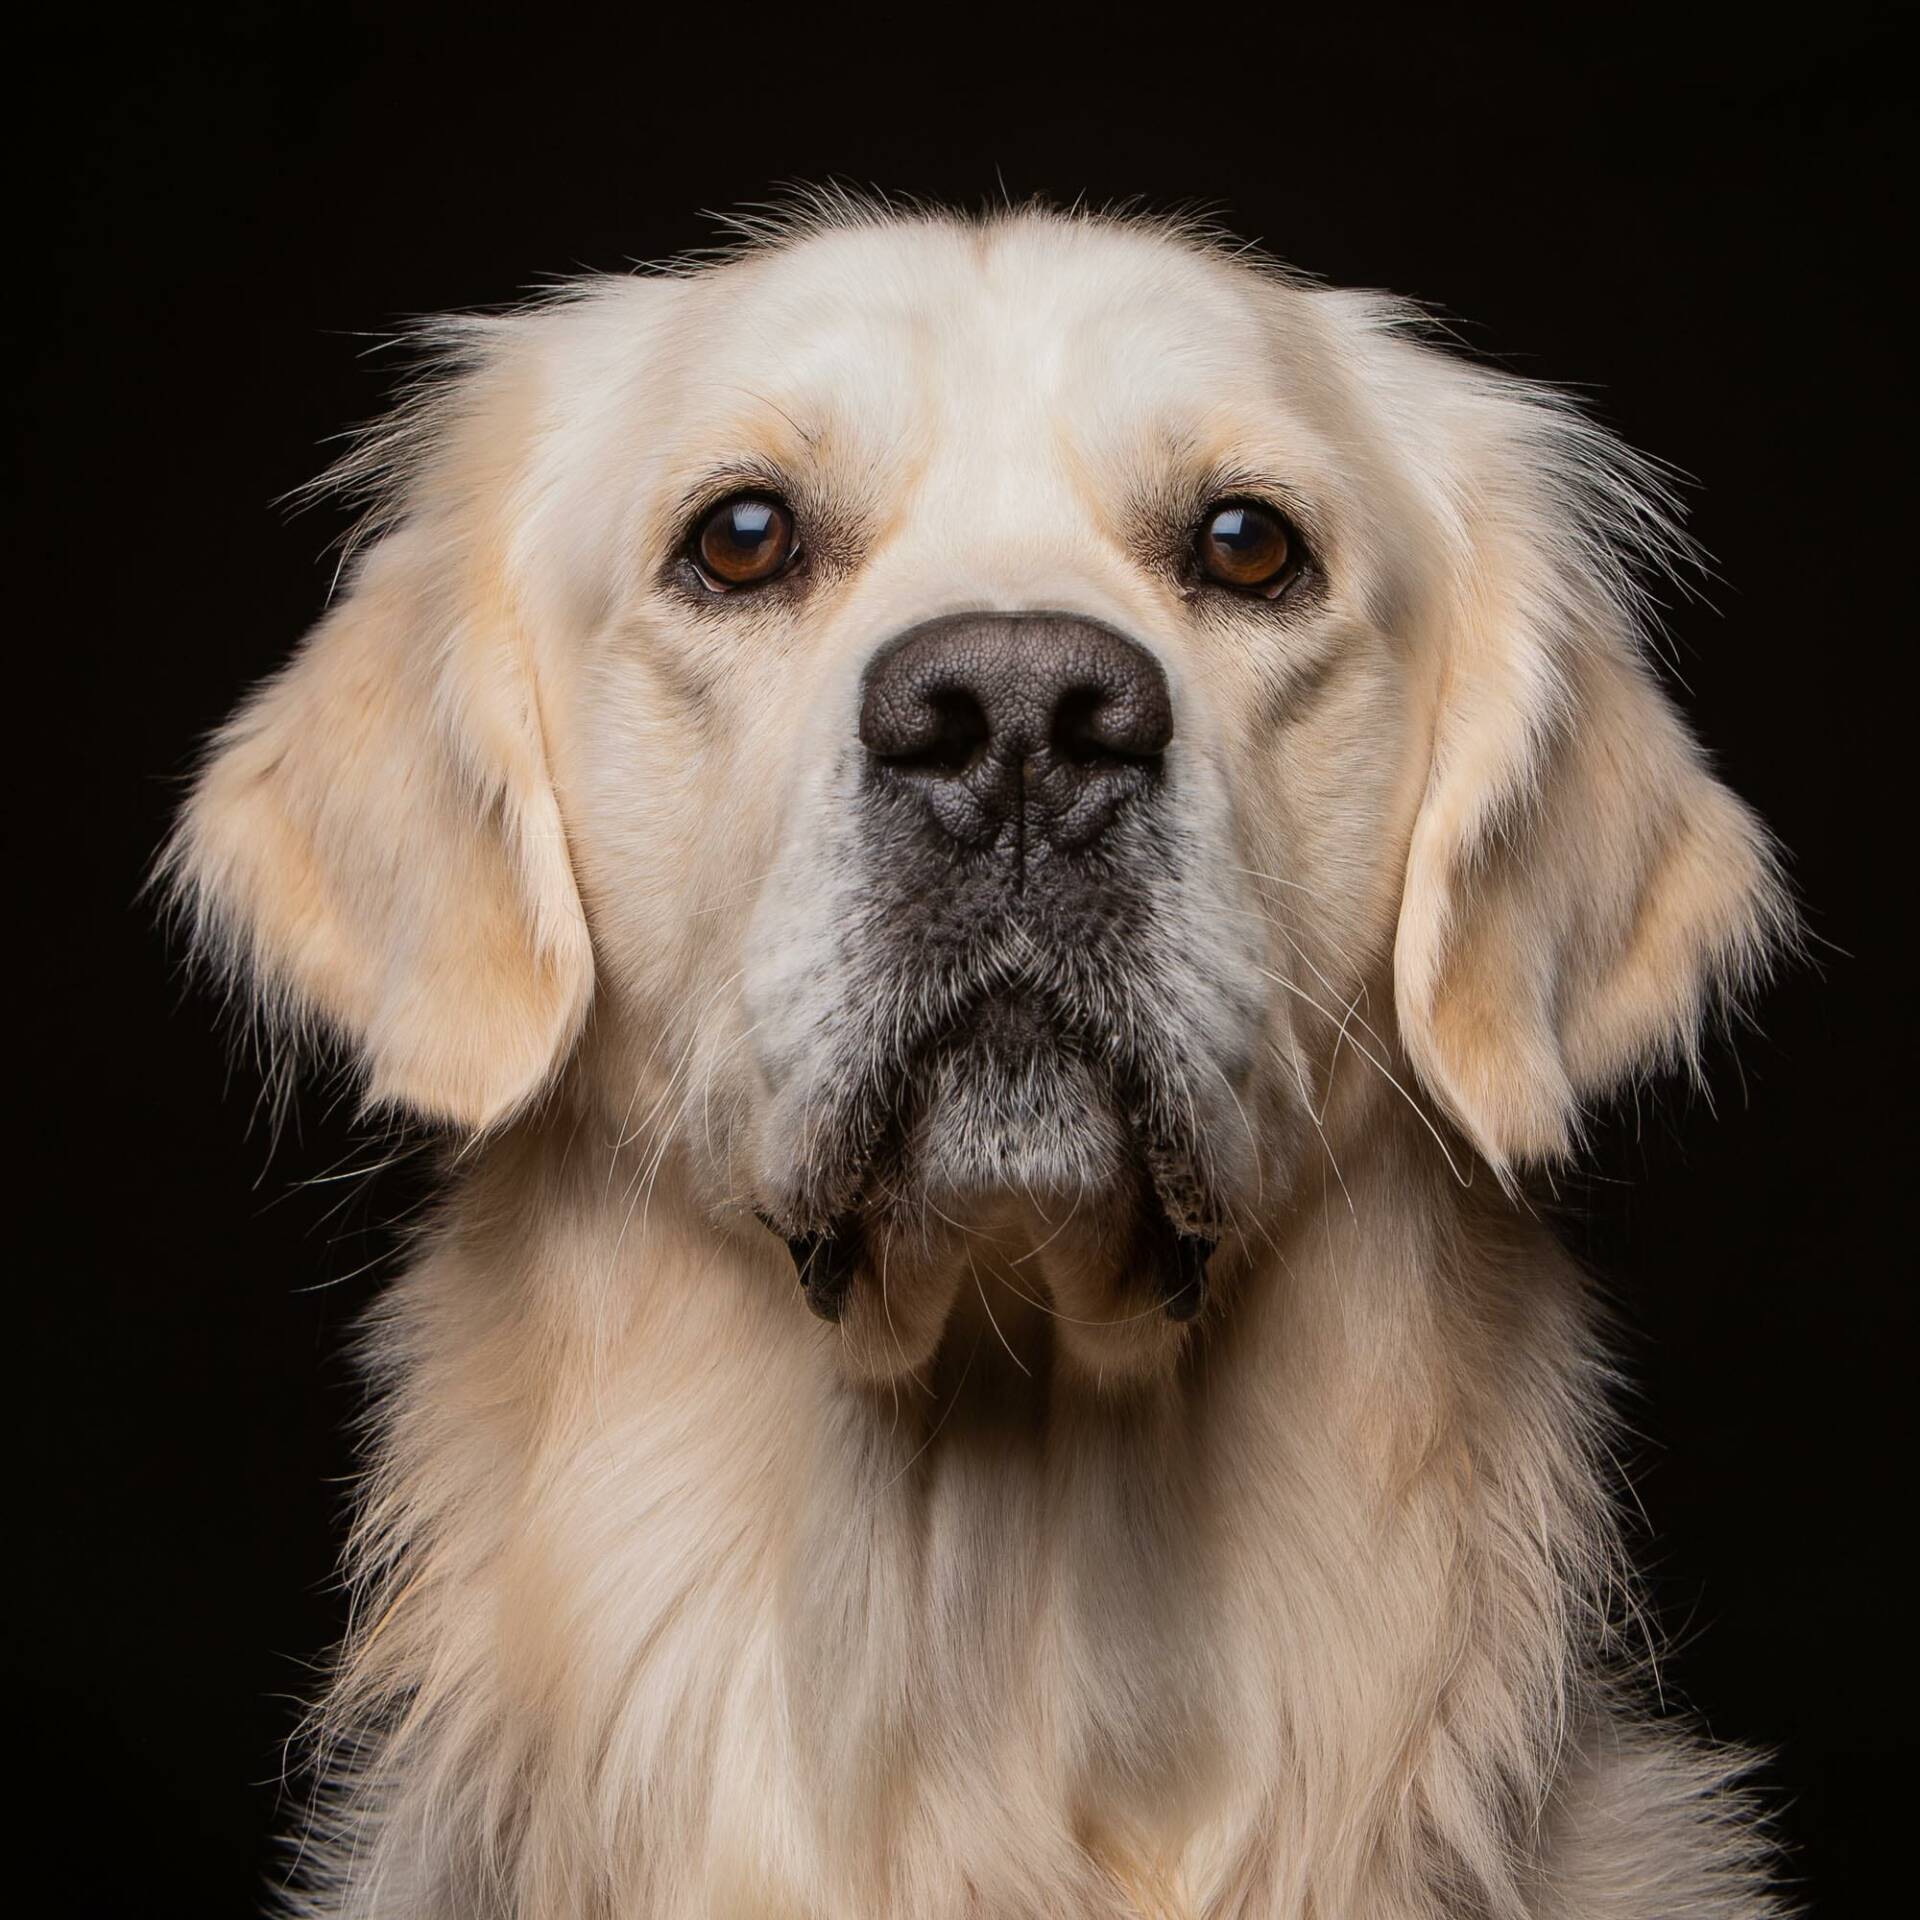 Golden Retriever by Mark Hewitson of Mark Hewitson Photography, Thame, Oxfordshire